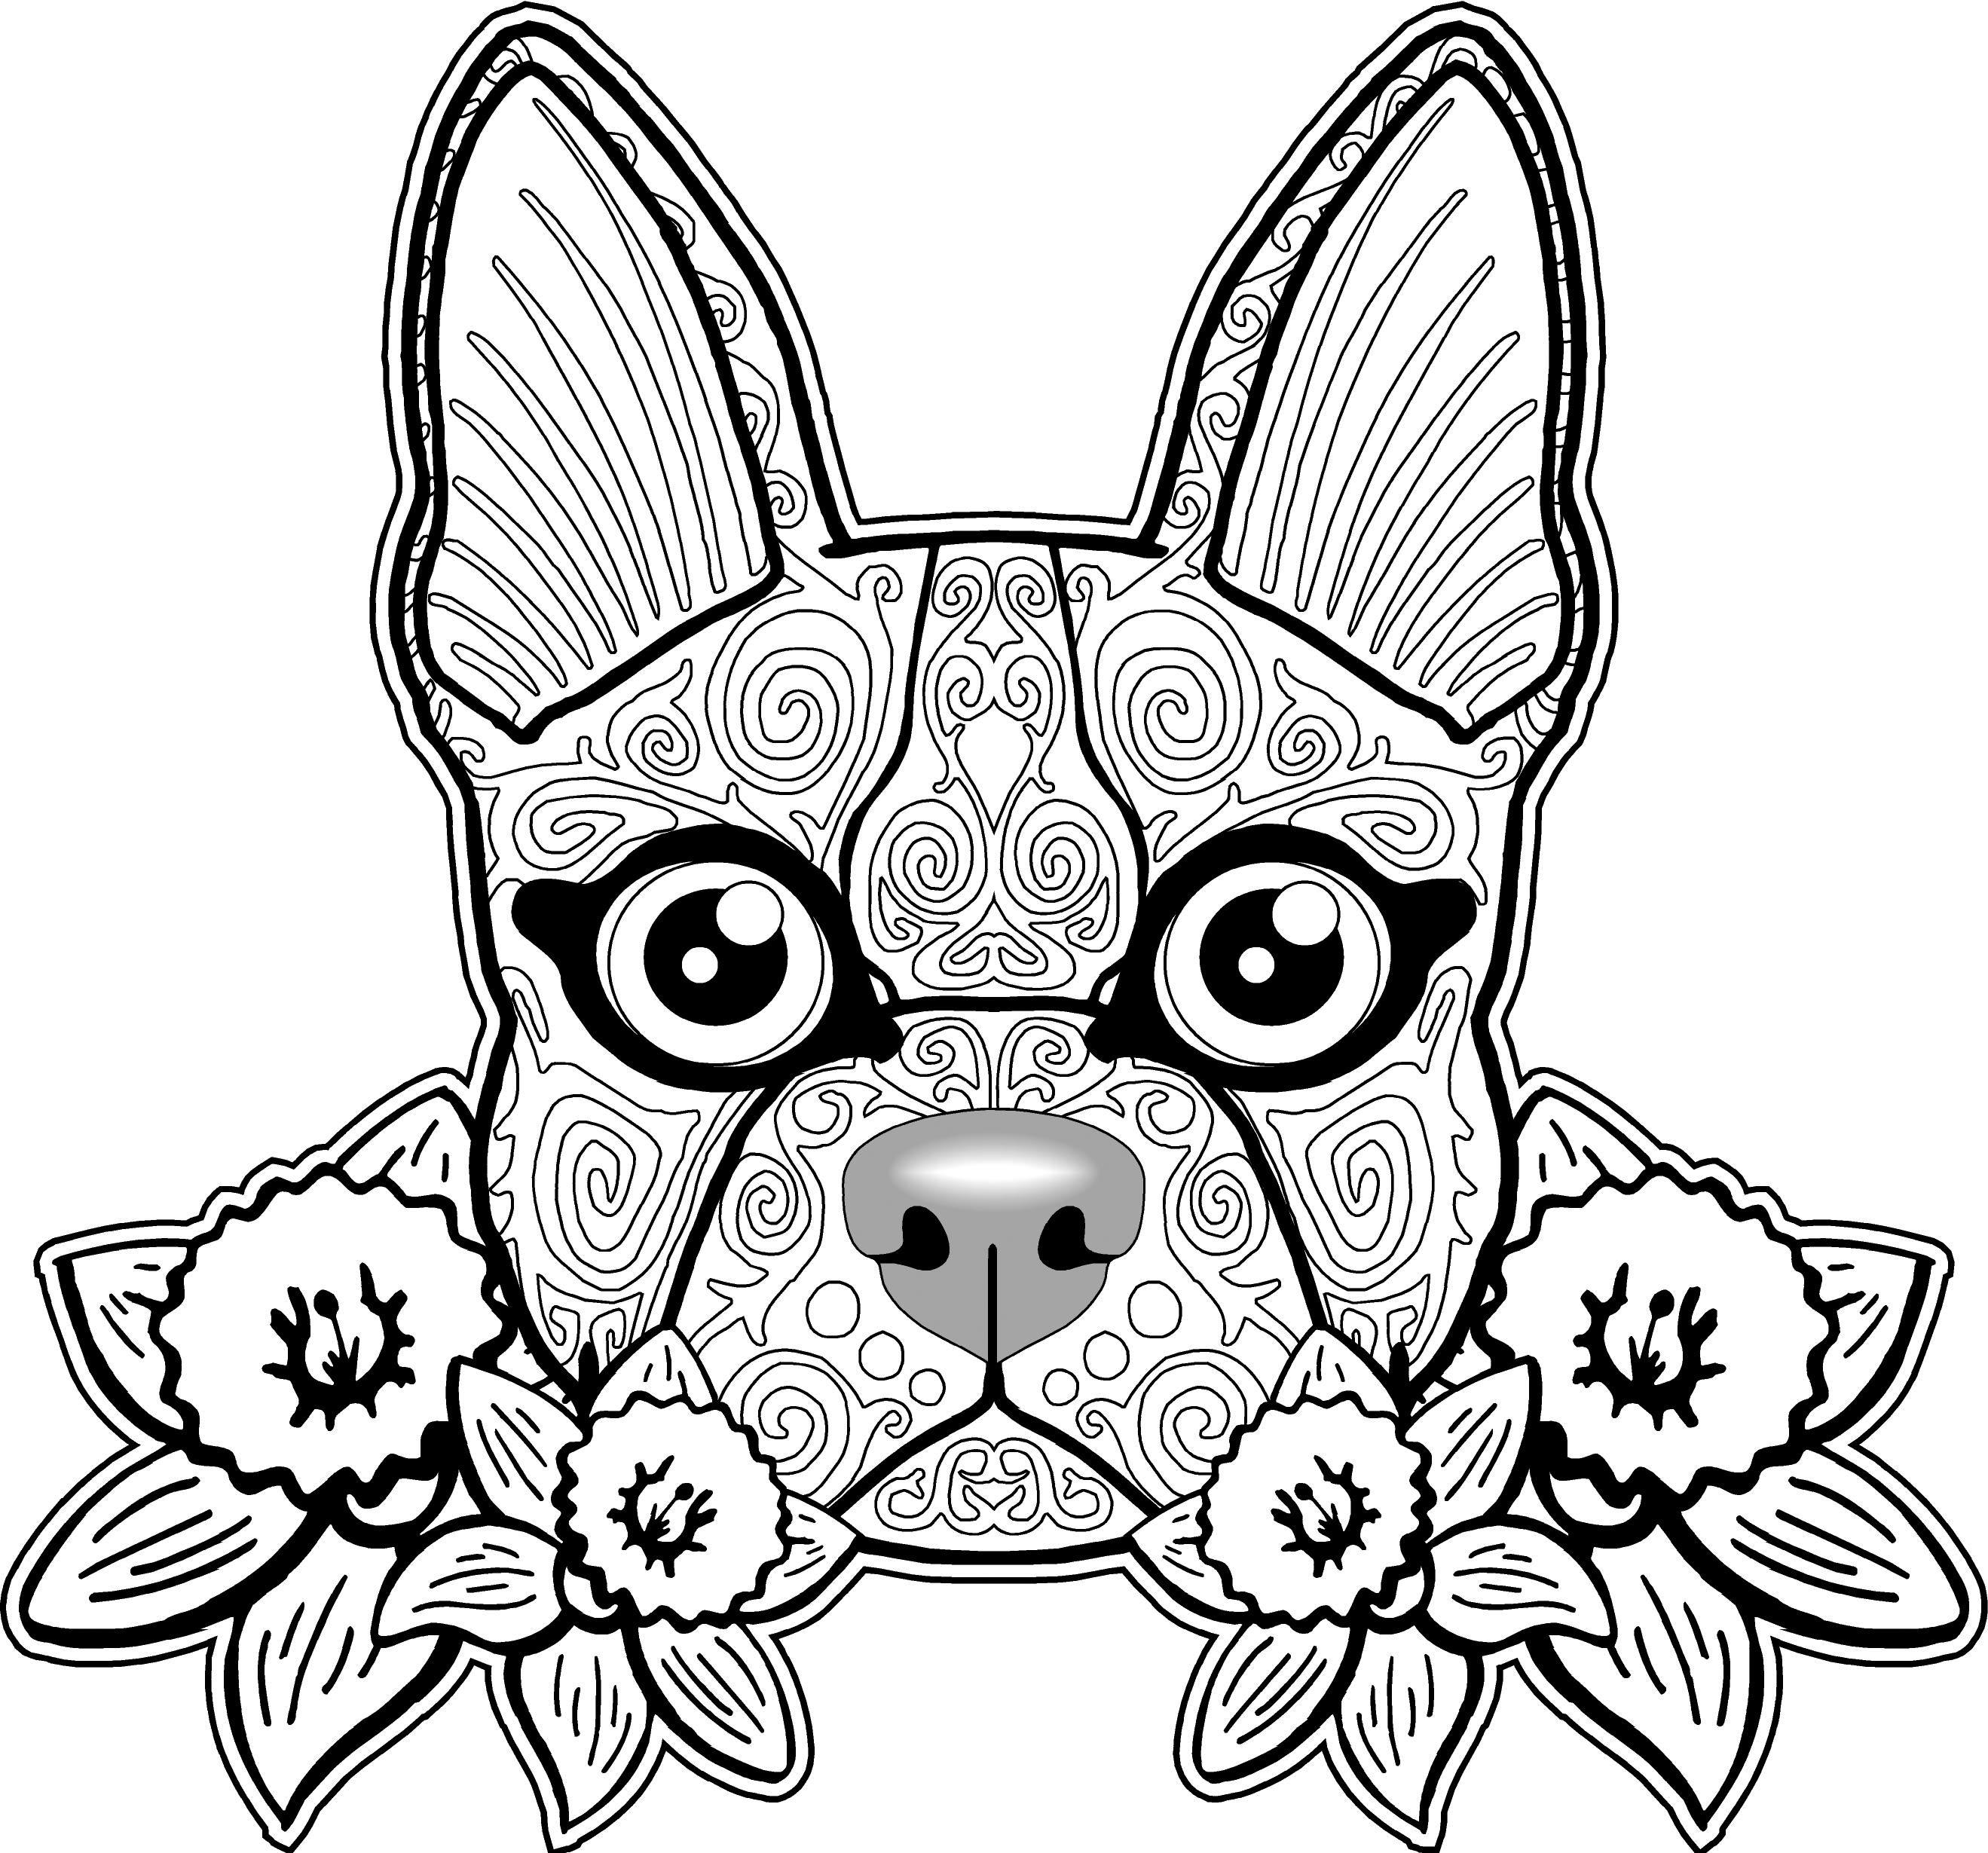 Download Sugar Skull Coloring Pages - Best Coloring Pages For Kids